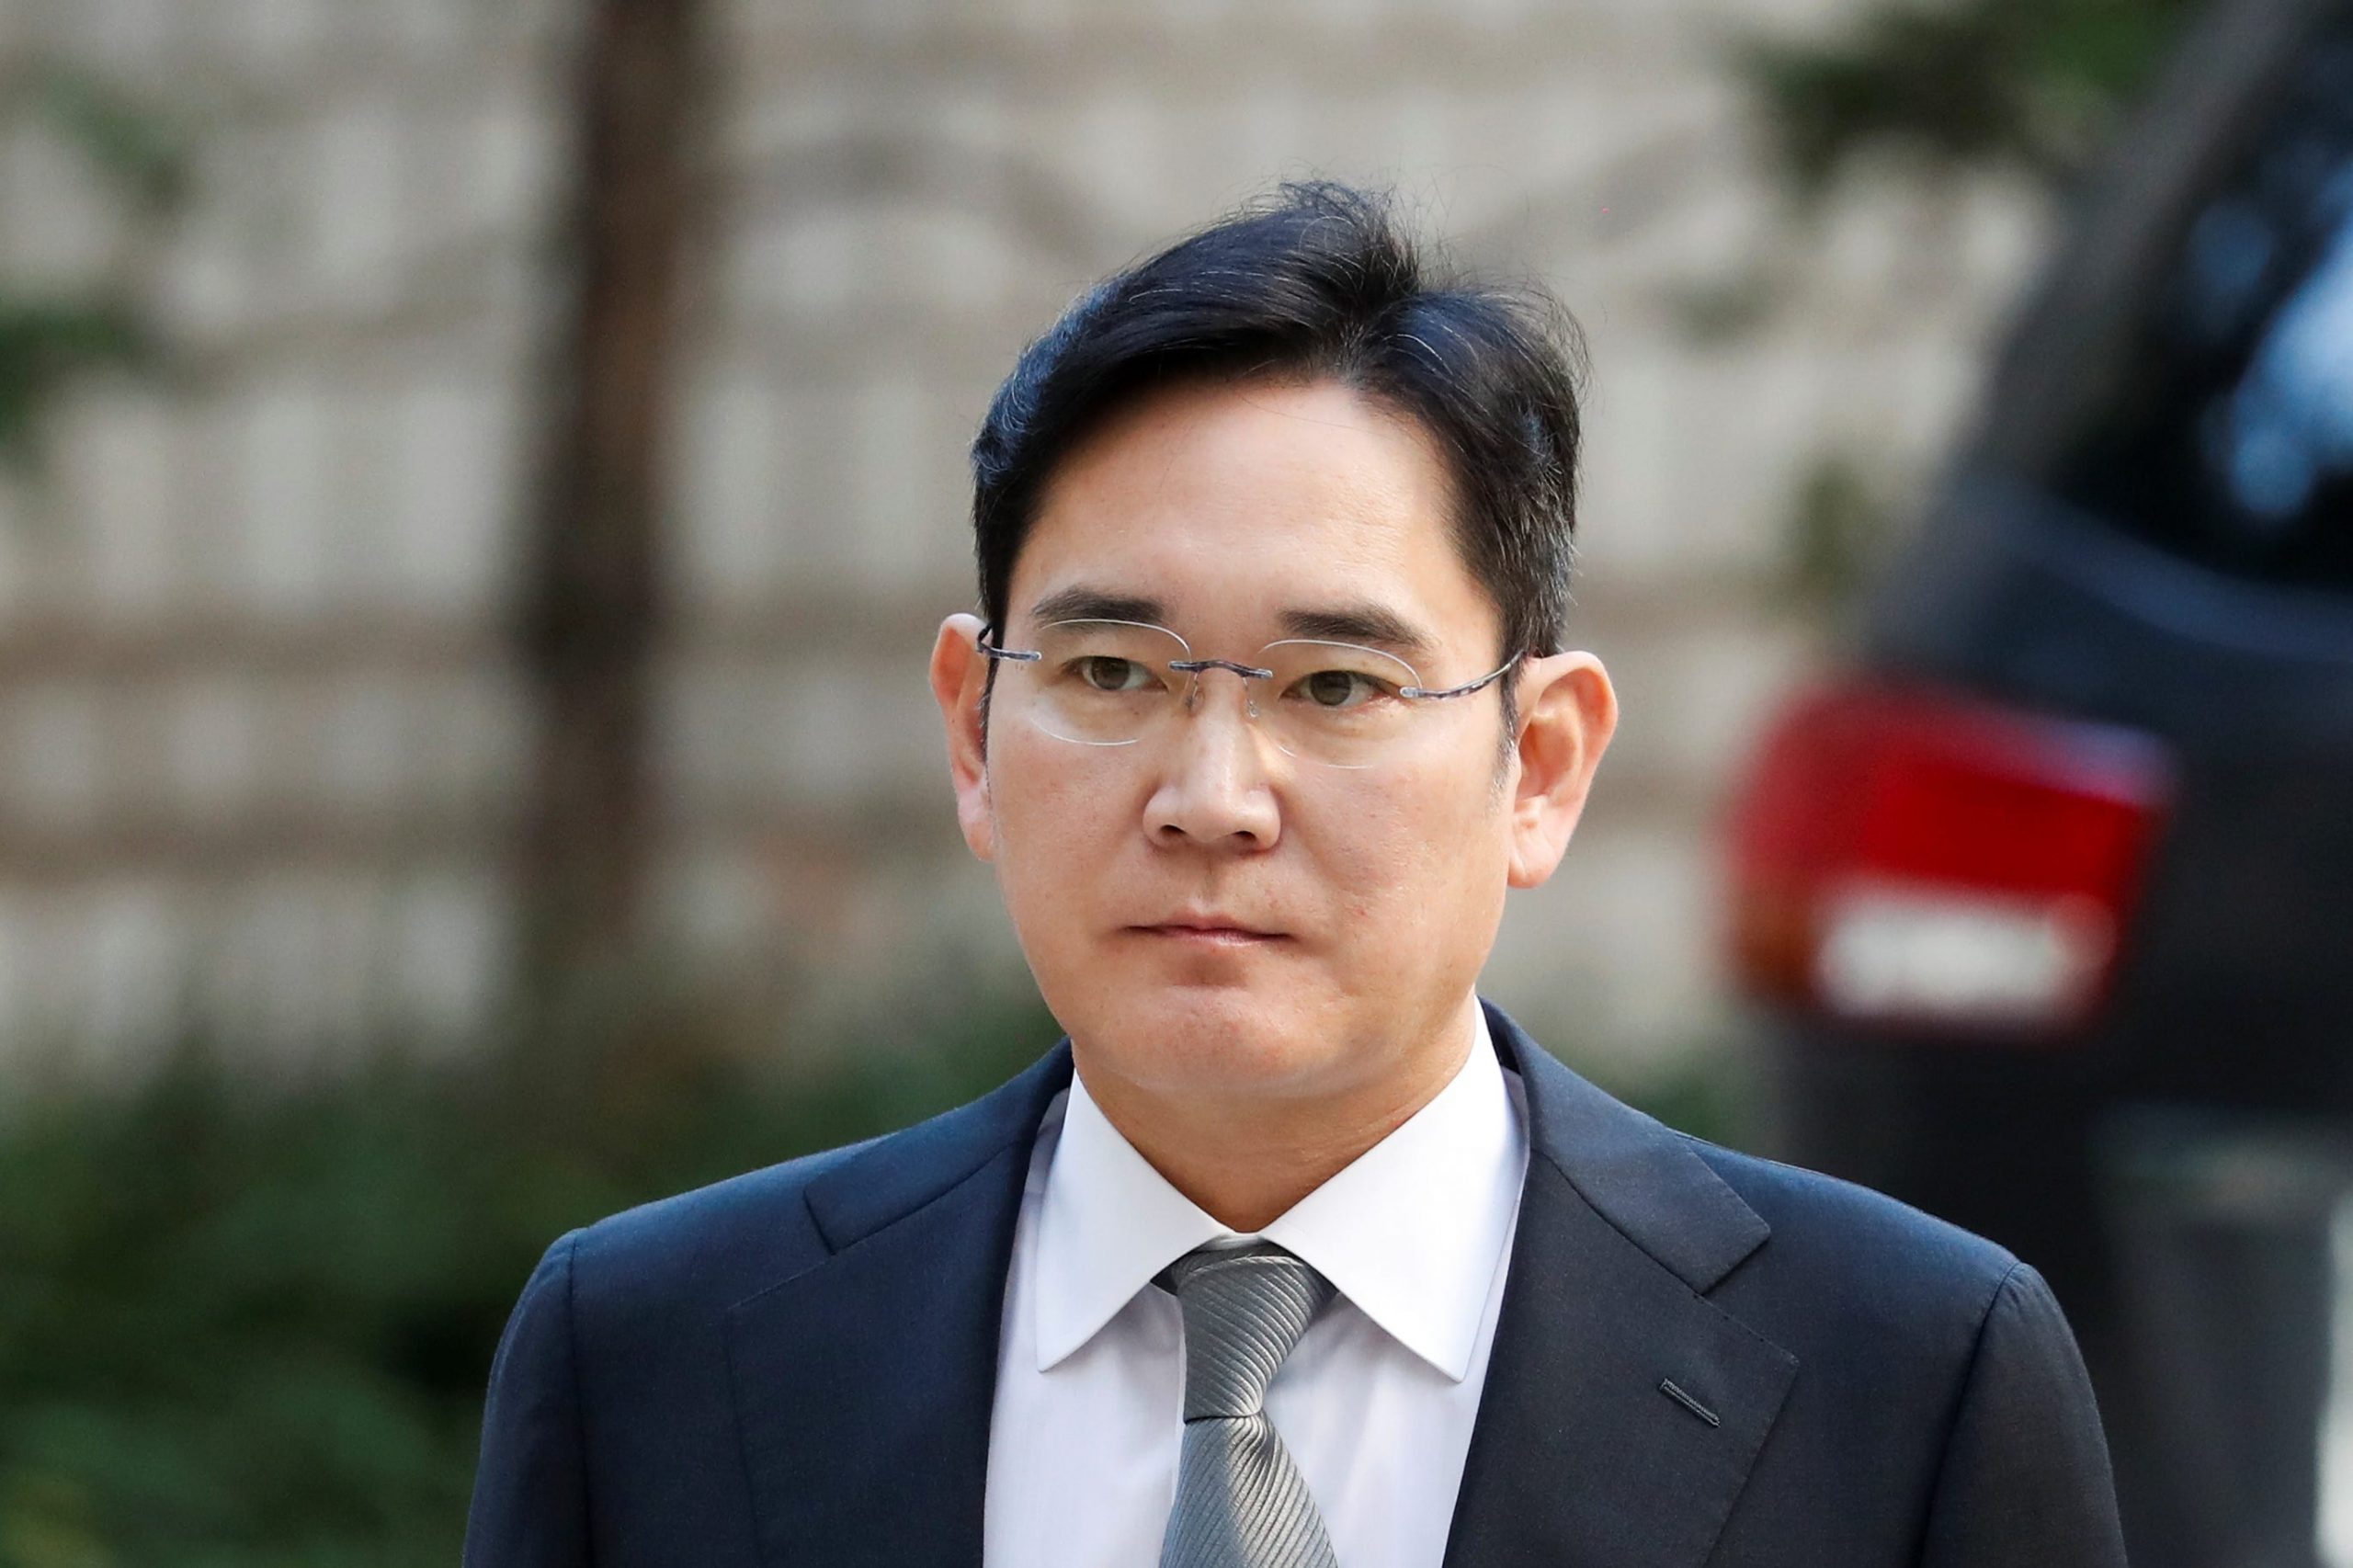 FILE PHOTO: Samsung Electronics Vice Chairman, Jay Y. Lee, arrives at Seoul high court in Seoul, South Korea, October 25, 2019.    REUTERS/Kim Hong-Ji